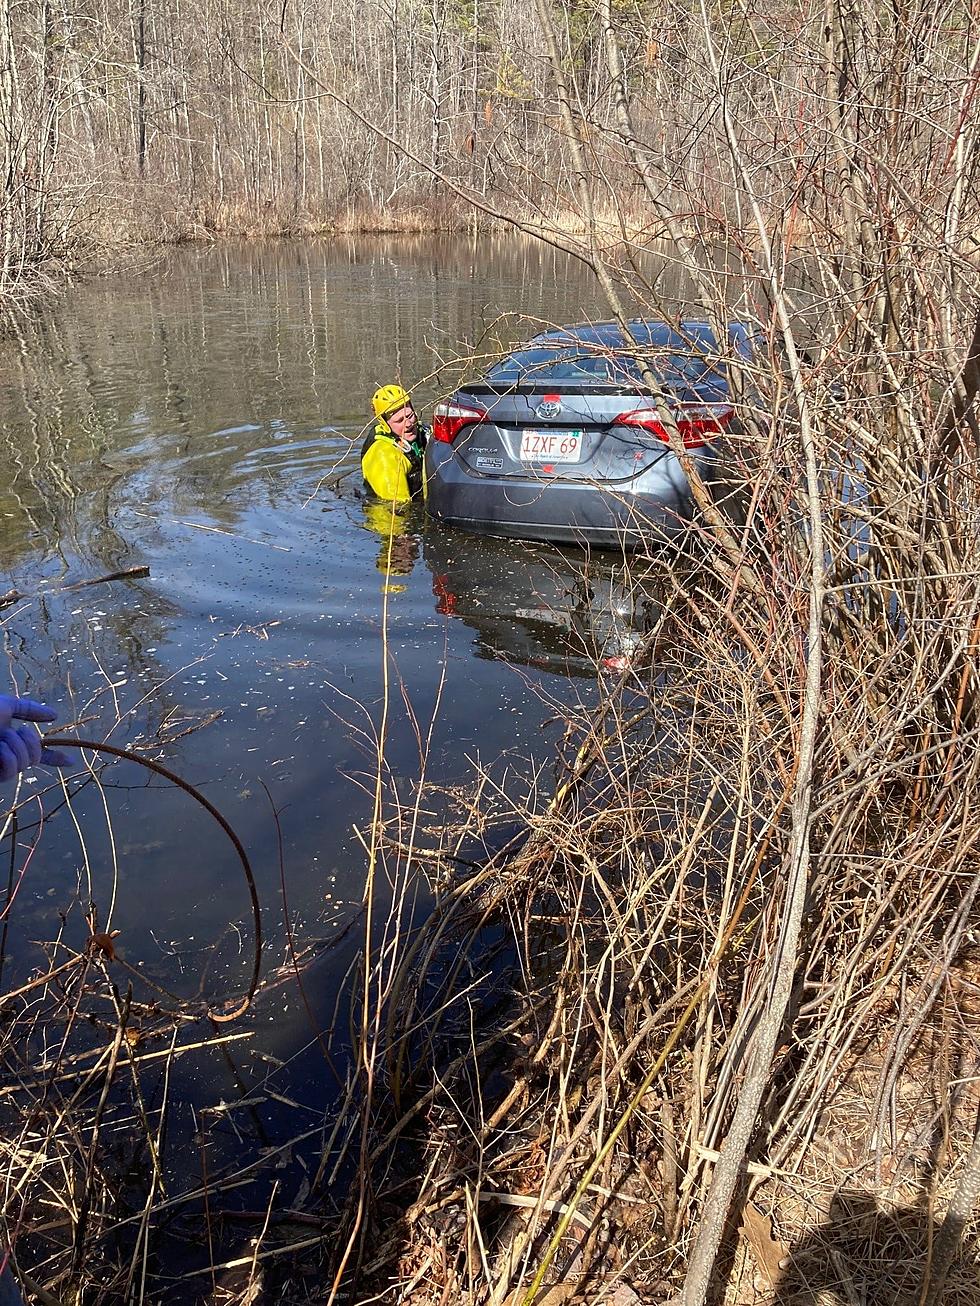 GB Fire Rescues Driver After Car Crashes Into Lake